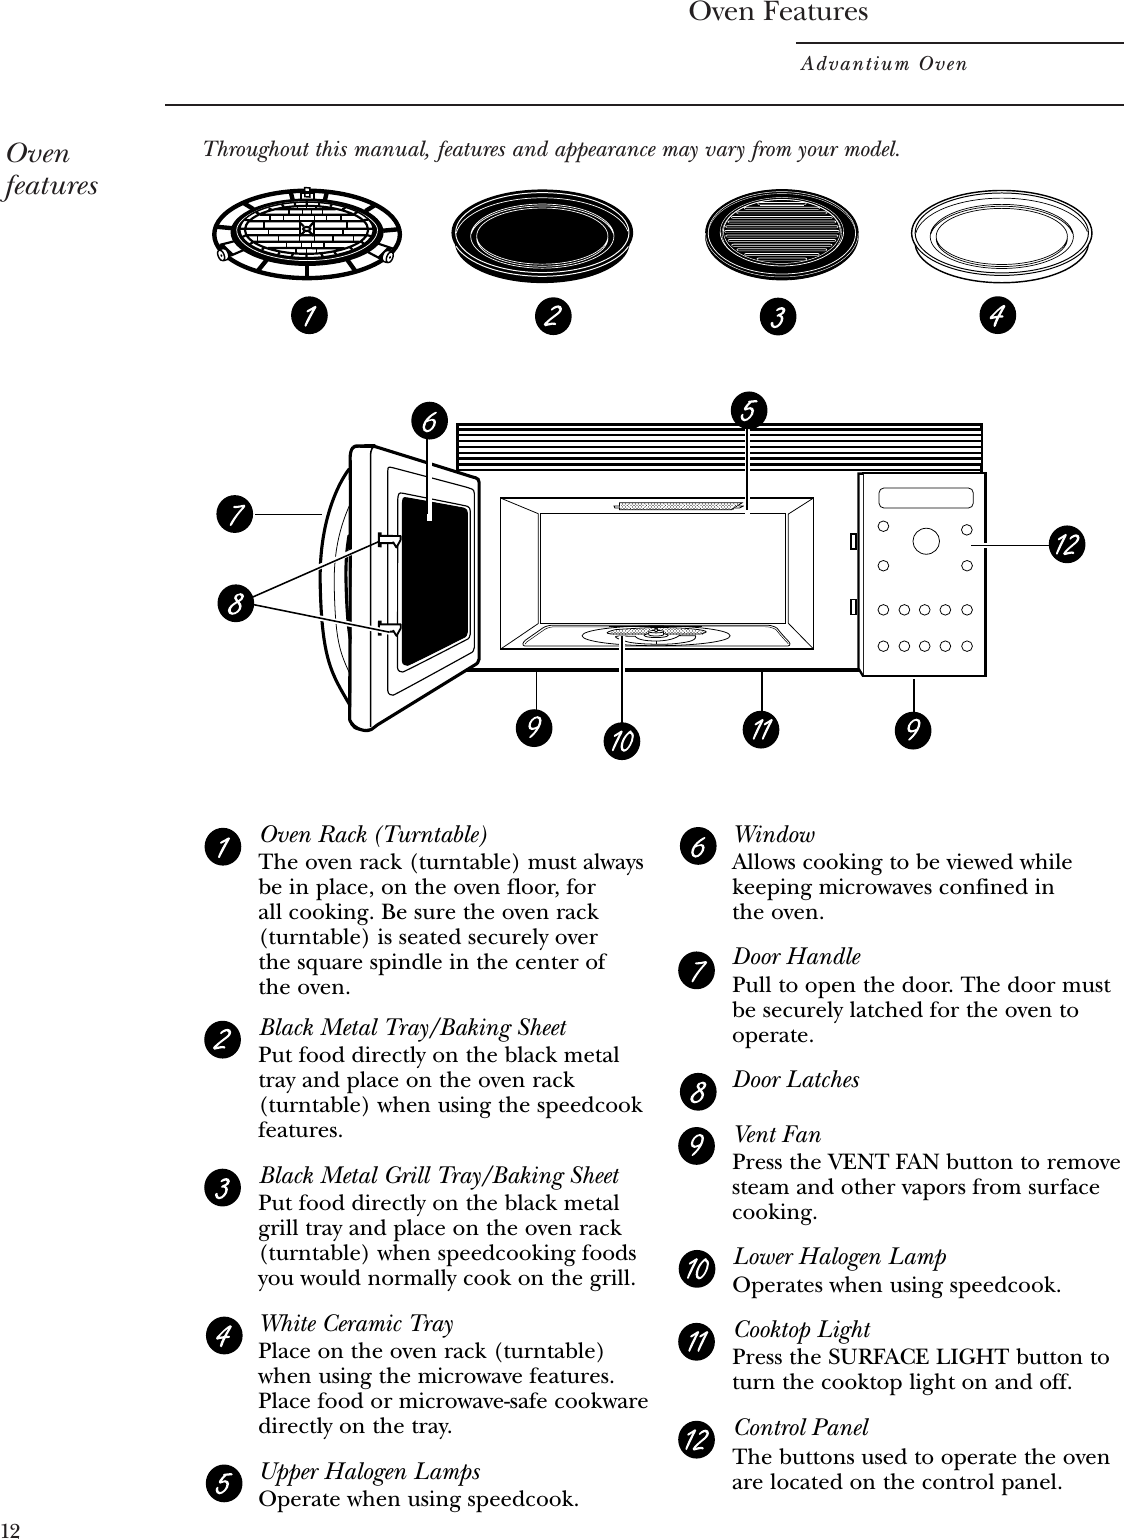 Oven FeaturesAdvantium Oven12OvenfeaturesThroughout this manual, features and appearance may vary from your model.Oven Rack (Turntable)The oven rack (turntable) must alwaysbe in place, on the oven floor, for all cooking. Be sure the oven rack(turntable) is seated securely over the square spindle in the center of the oven. Black Metal Tray/Baking SheetPut food directly on the black metaltray and place on the oven rack(turntable) when using the speedcookfeatures. Black Metal Grill Tray/Baking SheetPut food directly on the black metalgrill tray and place on the oven rack(turntable) when speedcooking foodsyou would normally cook on the grill.White Ceramic TrayPlace on the oven rack (turntable)when using the microwave features.Place food or microwave-safe cookwaredirectly on the tray.Upper Halogen LampsOperate when using speedcook. WindowAllows cooking to be viewed whilekeeping microwaves confined in the oven.Door HandlePull to open the door. The door mustbe securely latched for the oven tooperate.Door LatchesVent FanPress the VENT FAN button to removesteam and other vapors from surfacecooking.Lower Halogen LampOperates when using speedcook.Cooktop LightPress the SURFACE LIGHT button toturn the cooktop light on and off.Control PanelThe buttons used to operate the ovenare located on the control panel.